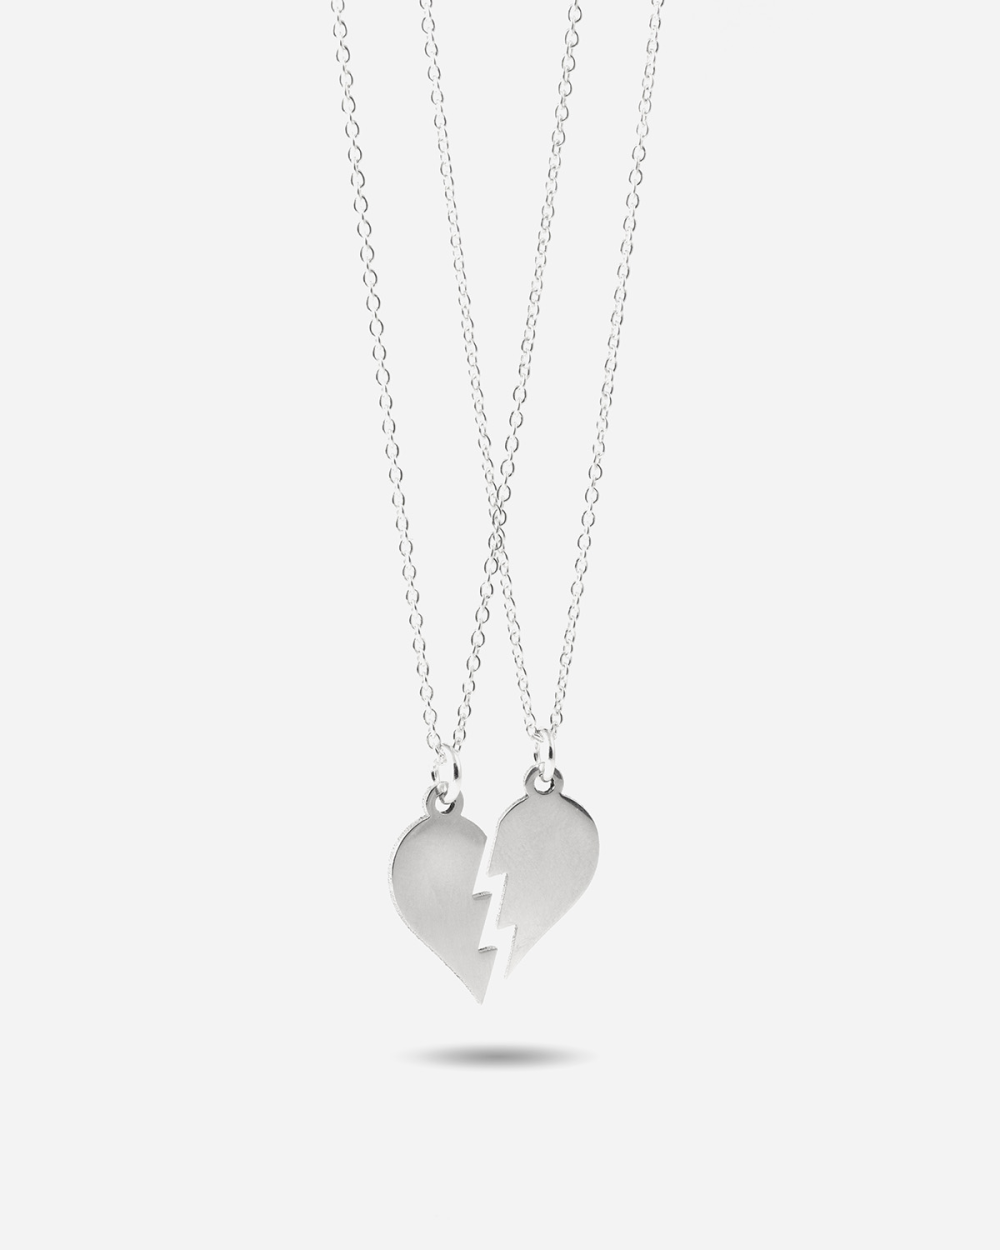 Buy Personalized Broken Heart Necklace, Silver Broken Heart Necklace,  Engraved Split Heart Necklace, His & Hers Necklace, Valentine's Day Gift  Online in India - Etsy